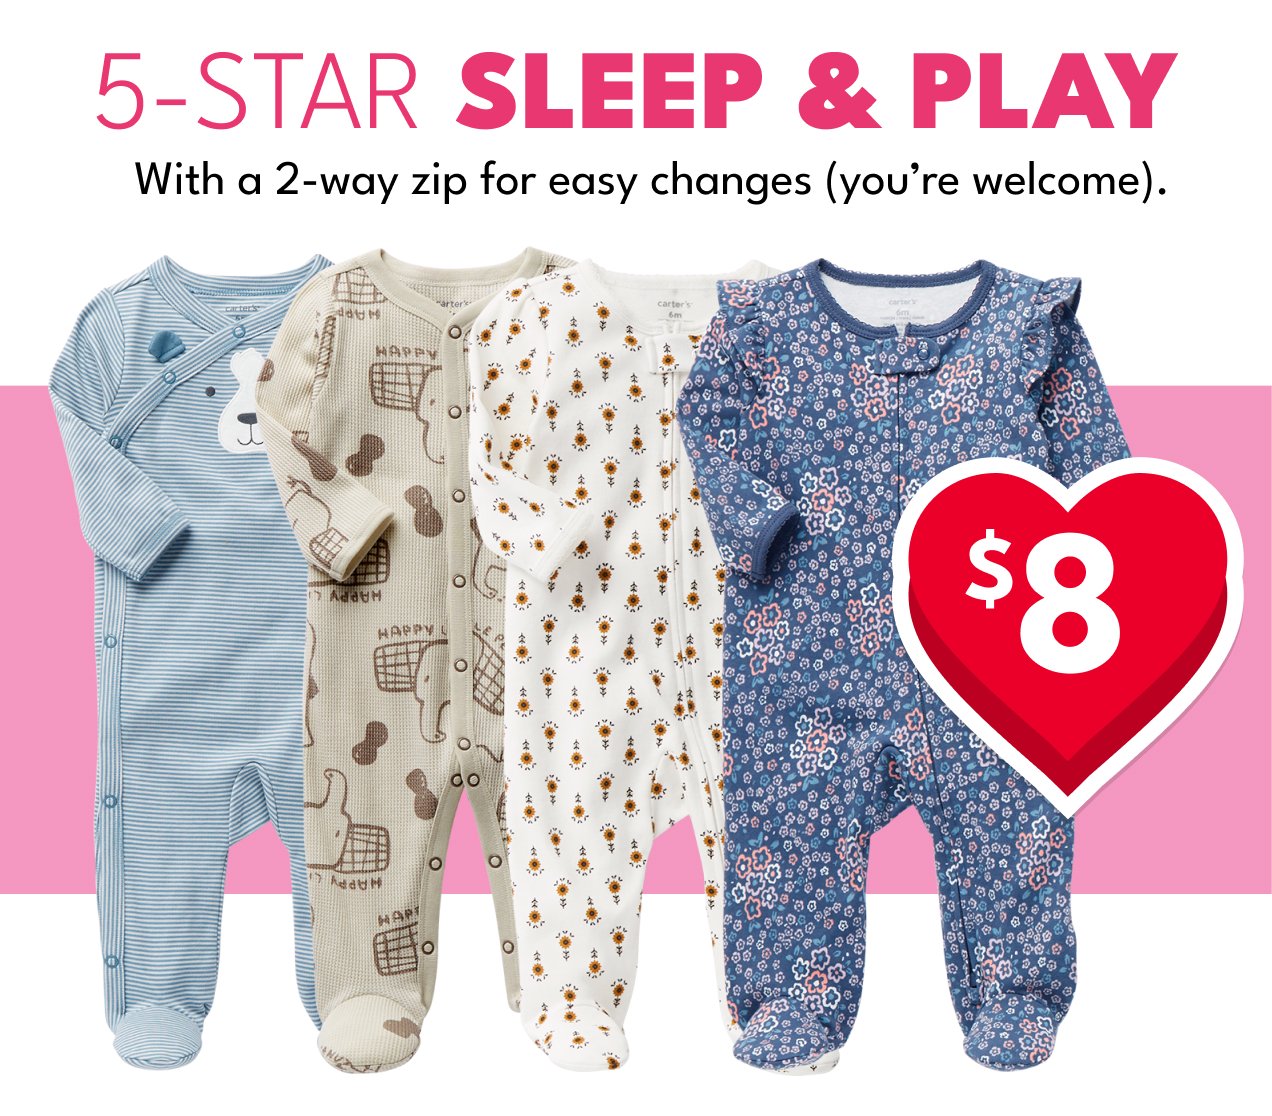 5-STAR SLEEP & PLAY | With a 2-way zip for easy changes (you're welcome). | \\$8